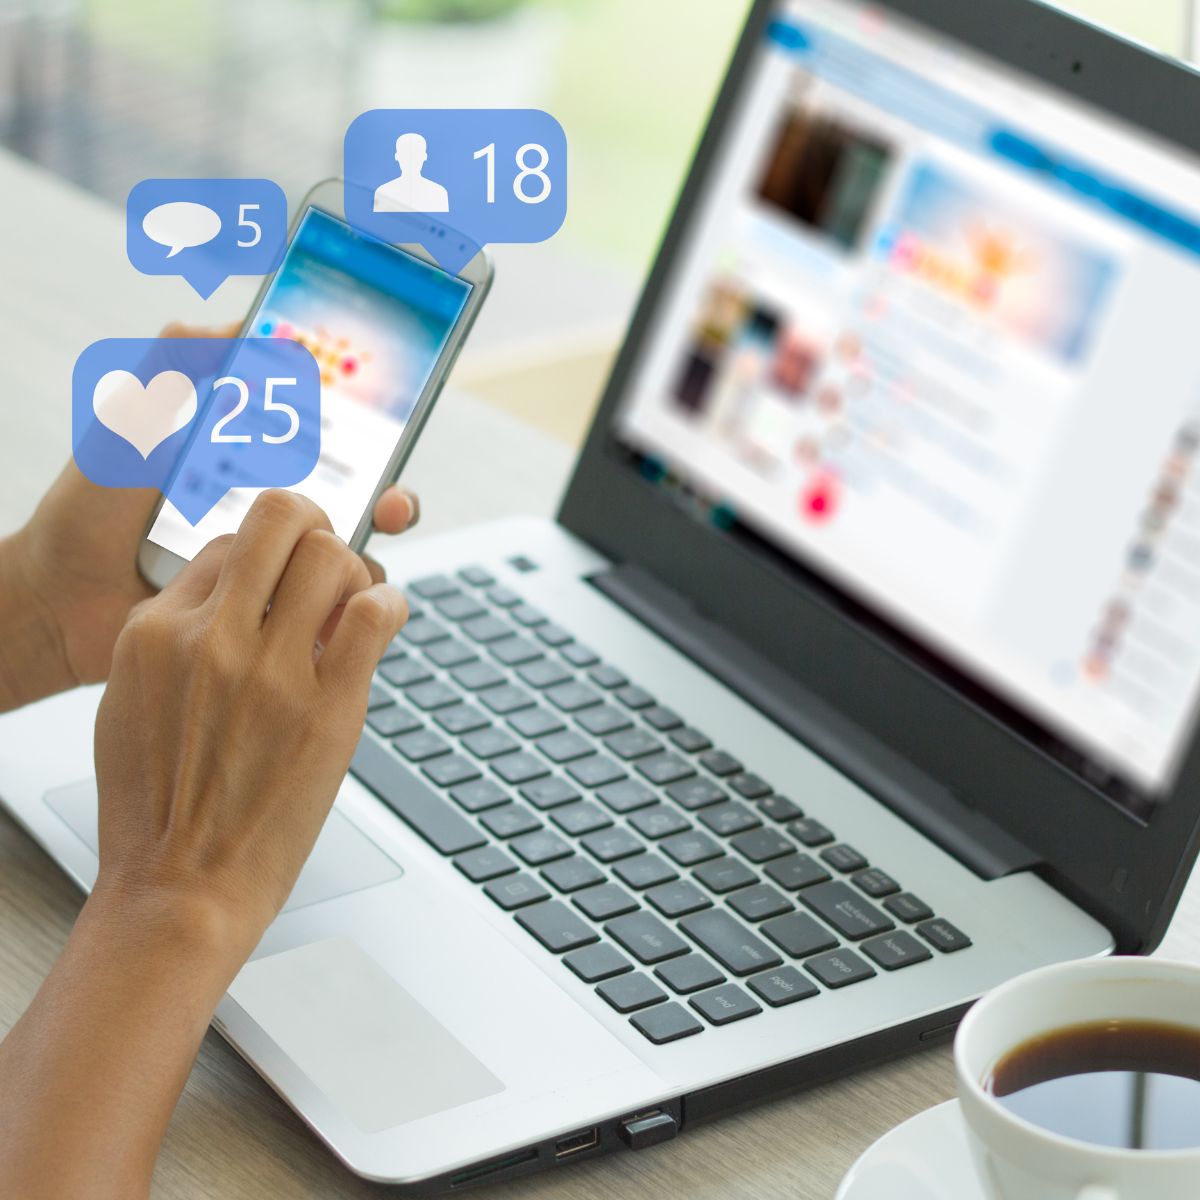 managing social media as one of the best ways moms can make money at home